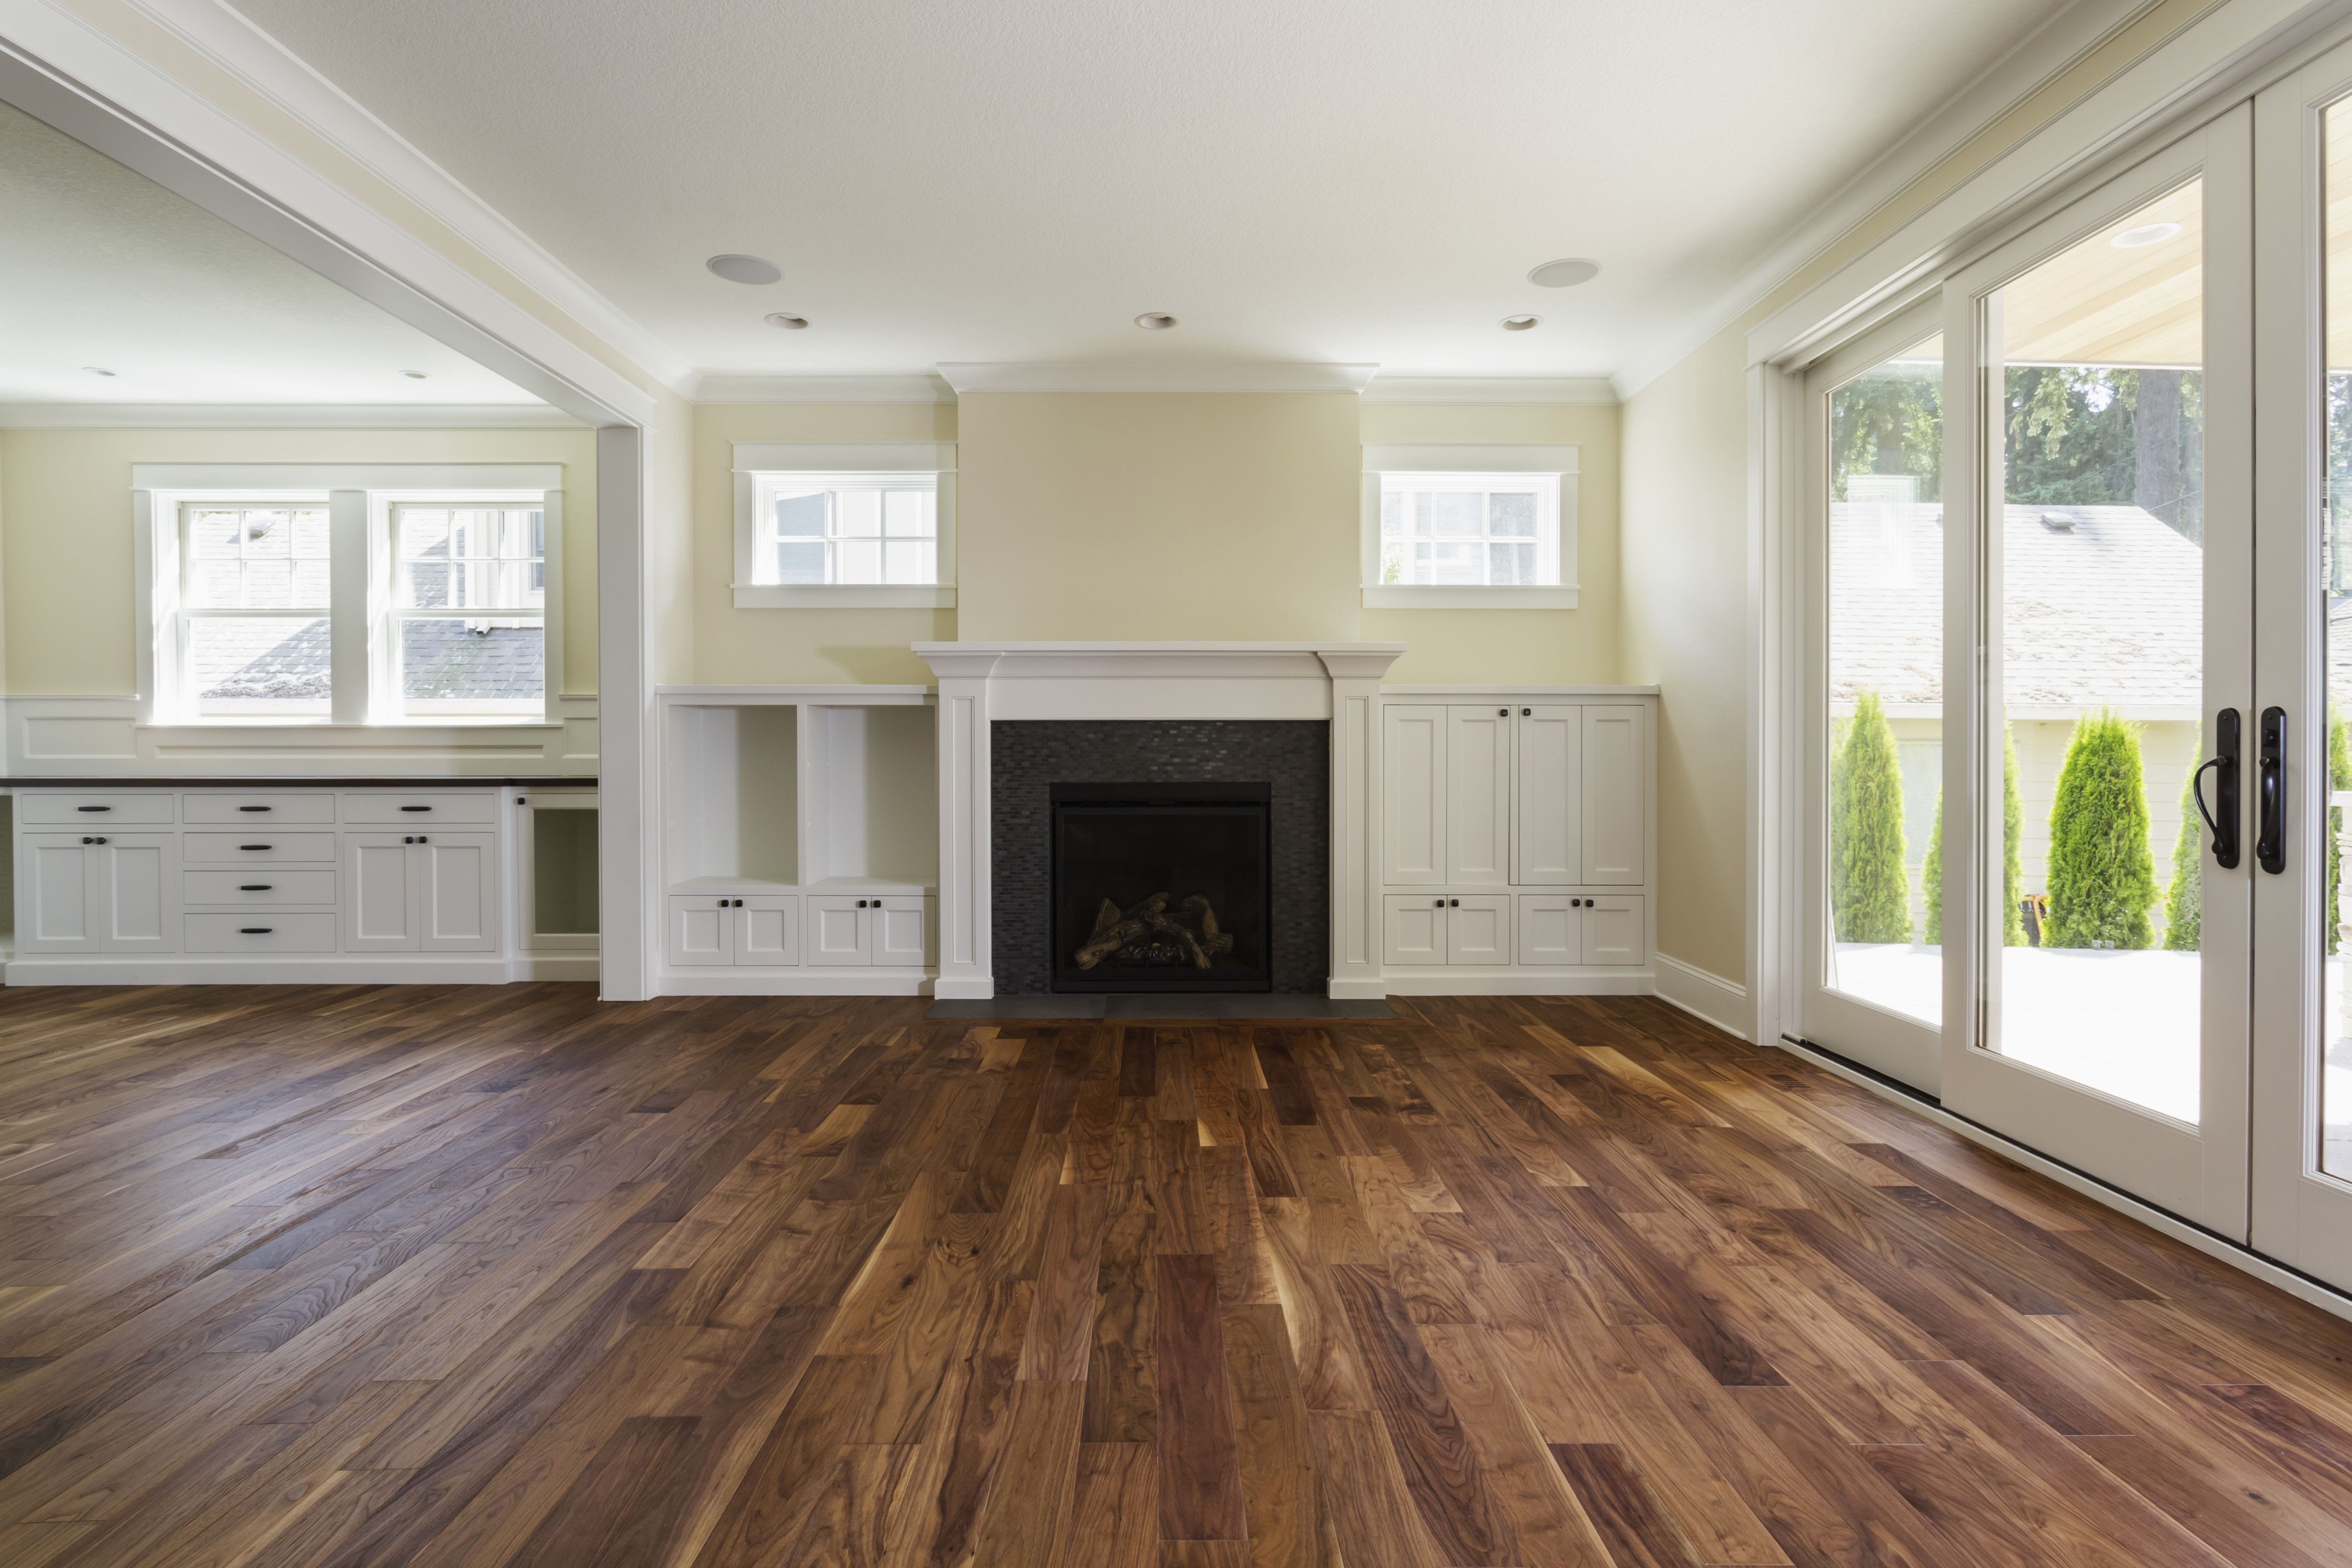 10 Cute How to Replace Engineered Hardwood Floor Planks 2024 free download how to replace engineered hardwood floor planks of the pros and cons of prefinished hardwood flooring for fireplace and built in shelves in living room 482143011 57bef8e33df78cc16e035397